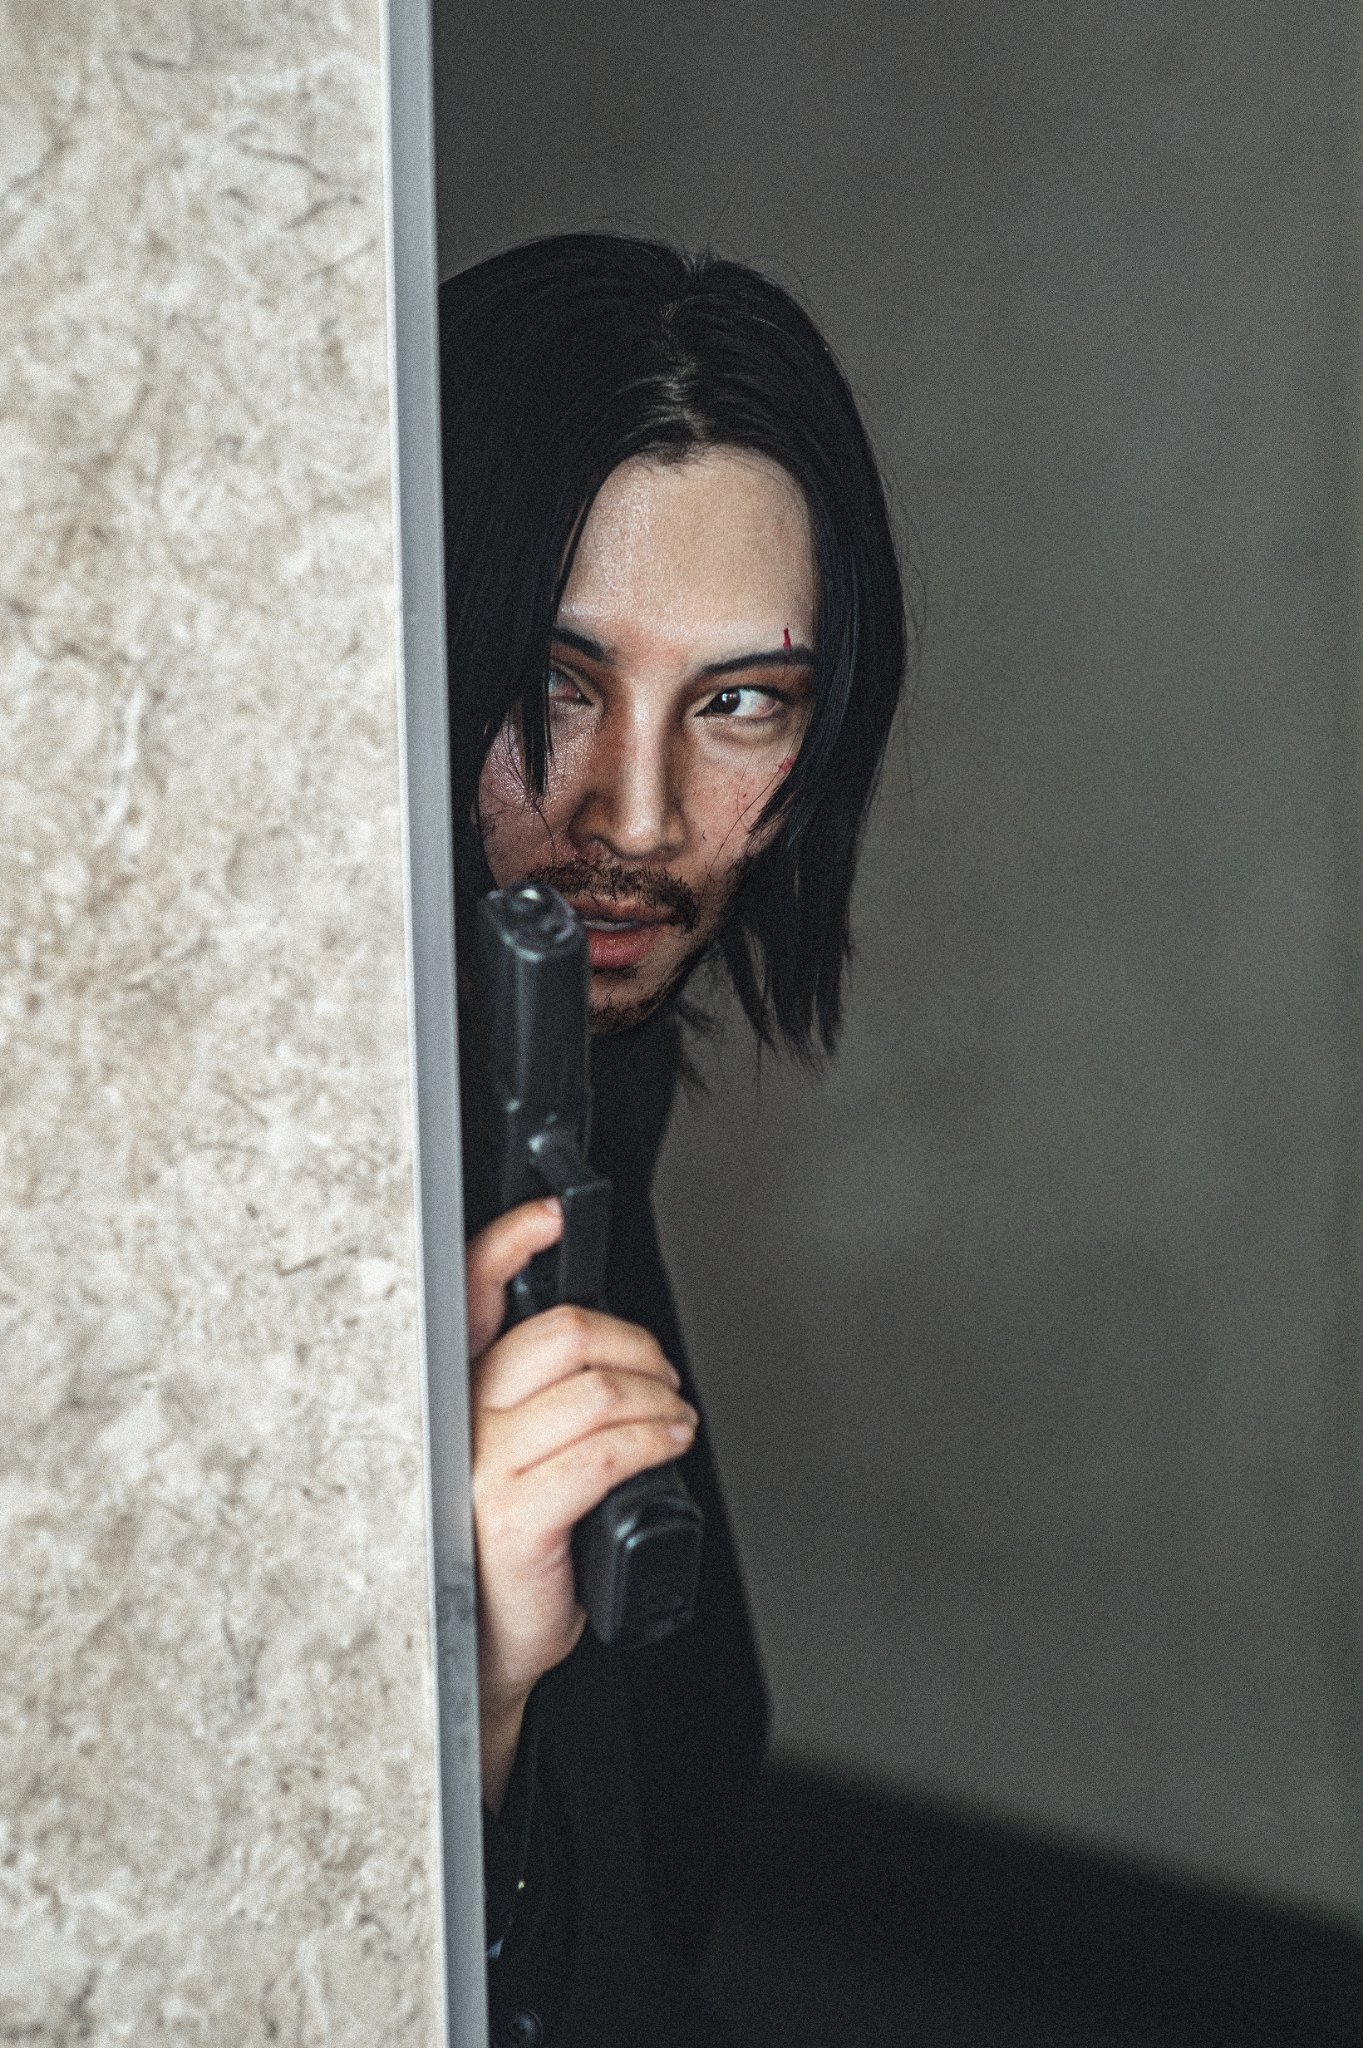 Happy birthday to Keanu reeves
John wick cosplay
Photo by 